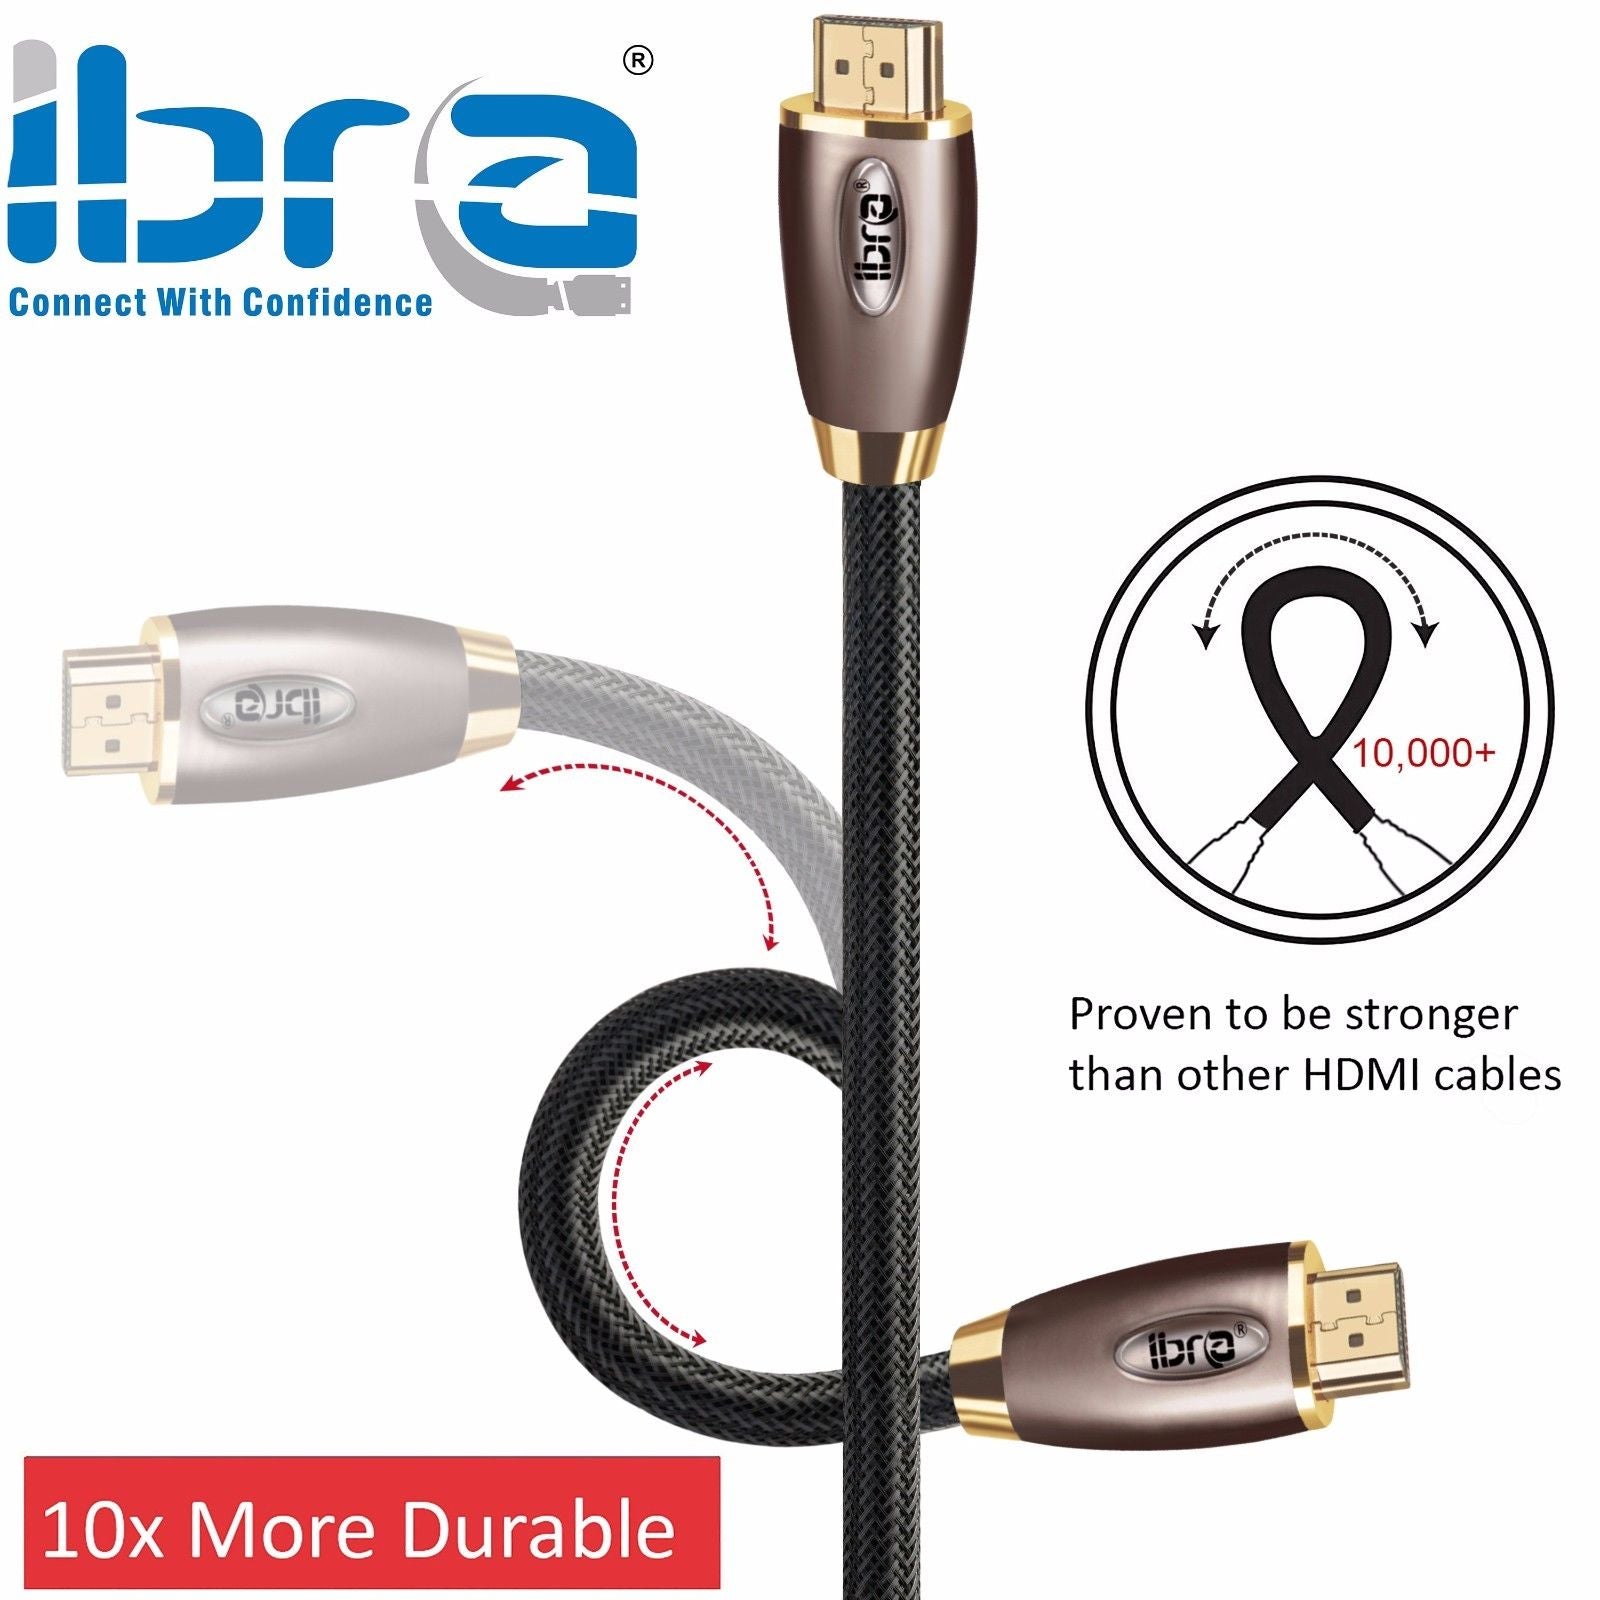 HDMI Cable 1M - 4K UHD HDMI 2.0(4K@60Hz) Ready -18Gbps-28AWG Braided Cord -Gold Plated Connectors -Ethernet,Audio Return -Video 4K 2160p,HD 1080p,3D -Xbox PlayStation PS3 PS4 PC Apple TV -IBRA RED